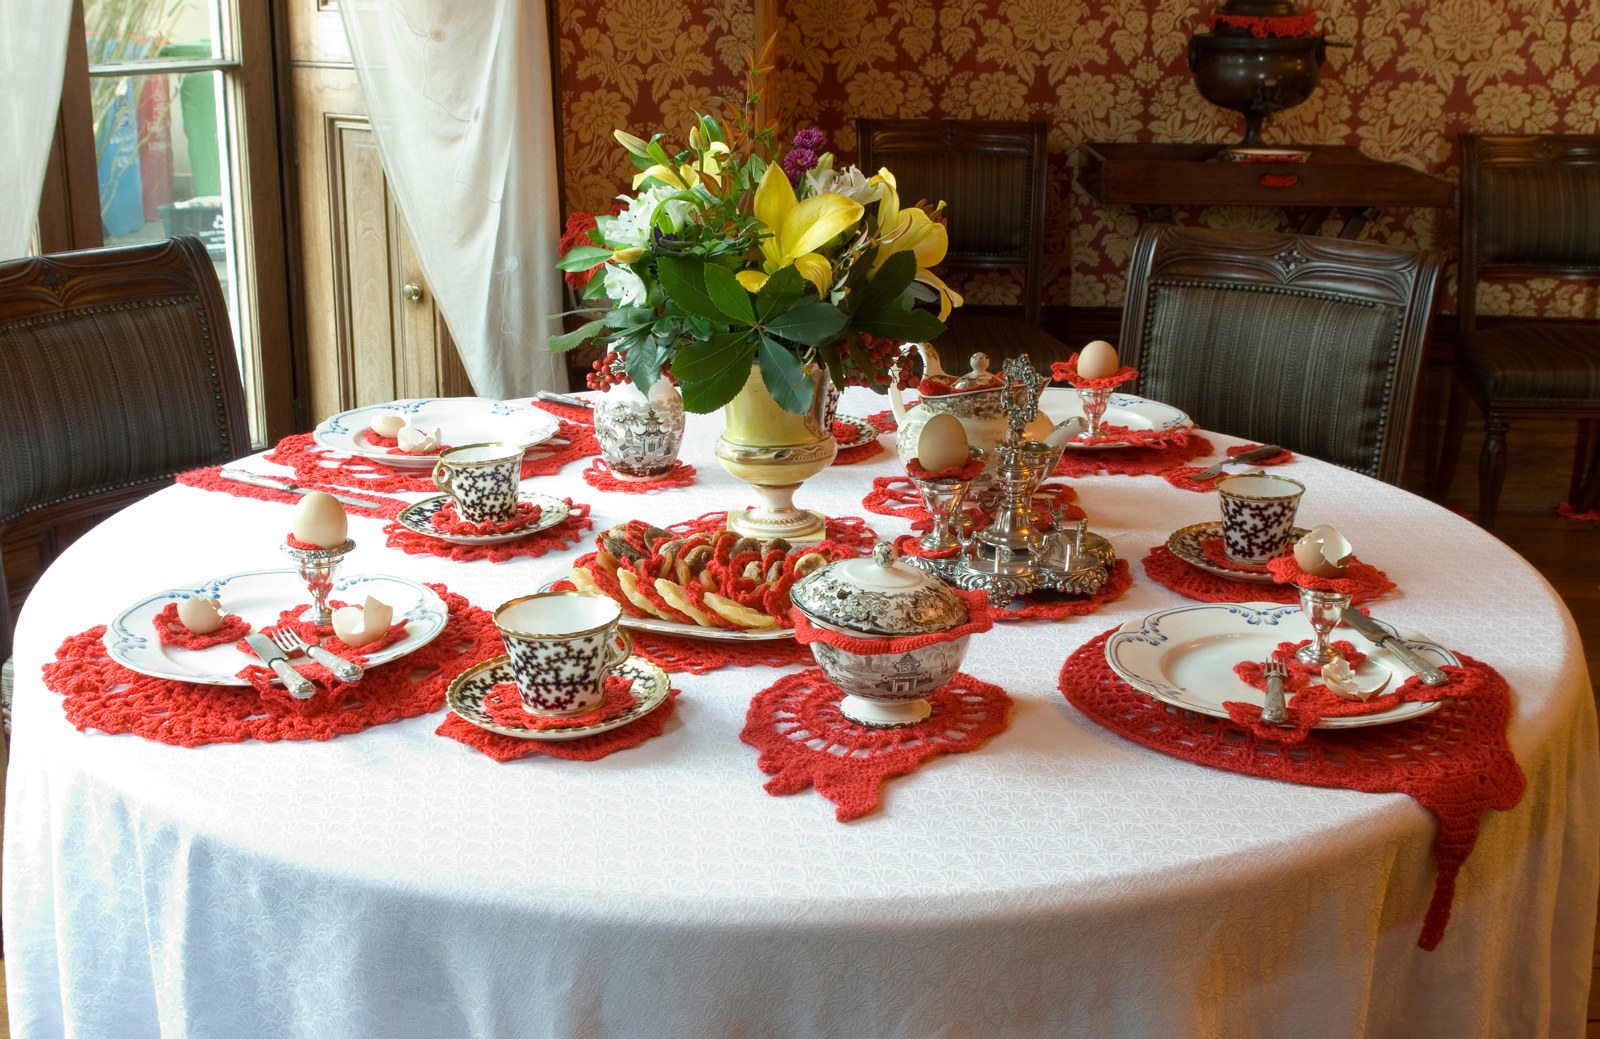 Red doilies sit under a formal 19th century tea set